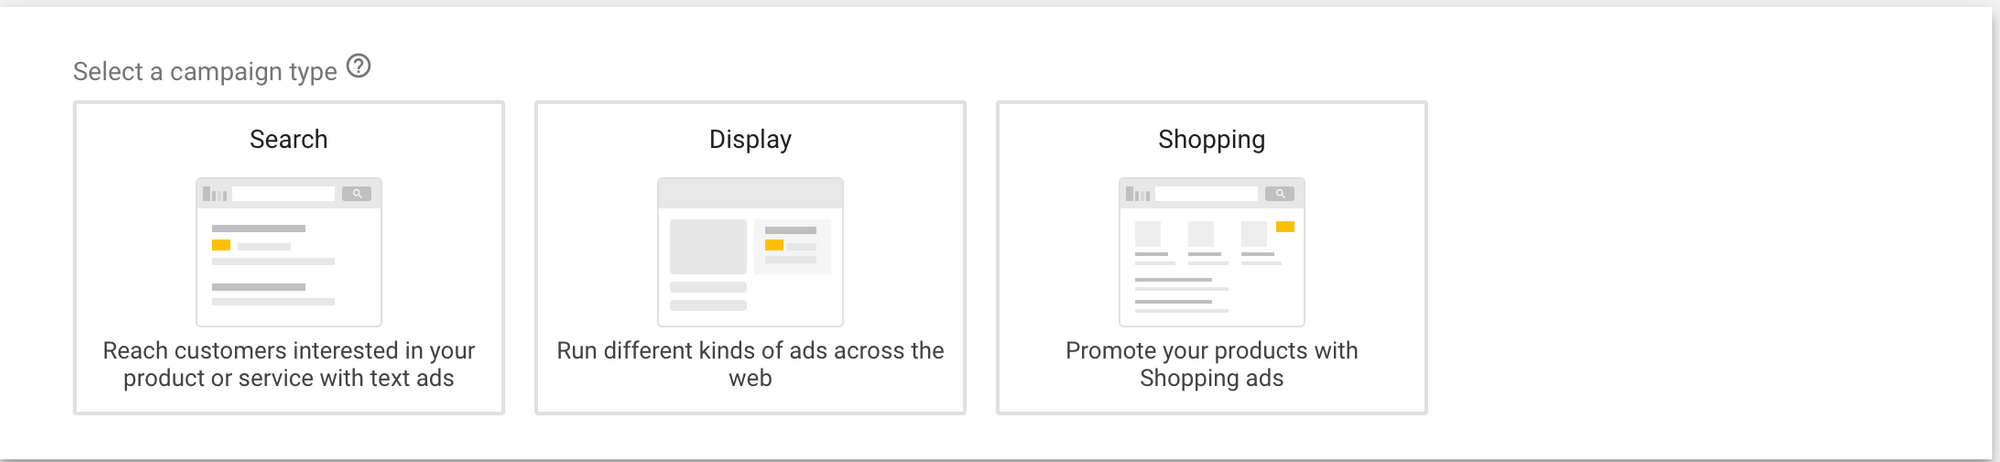 Google Ads Campaign Type